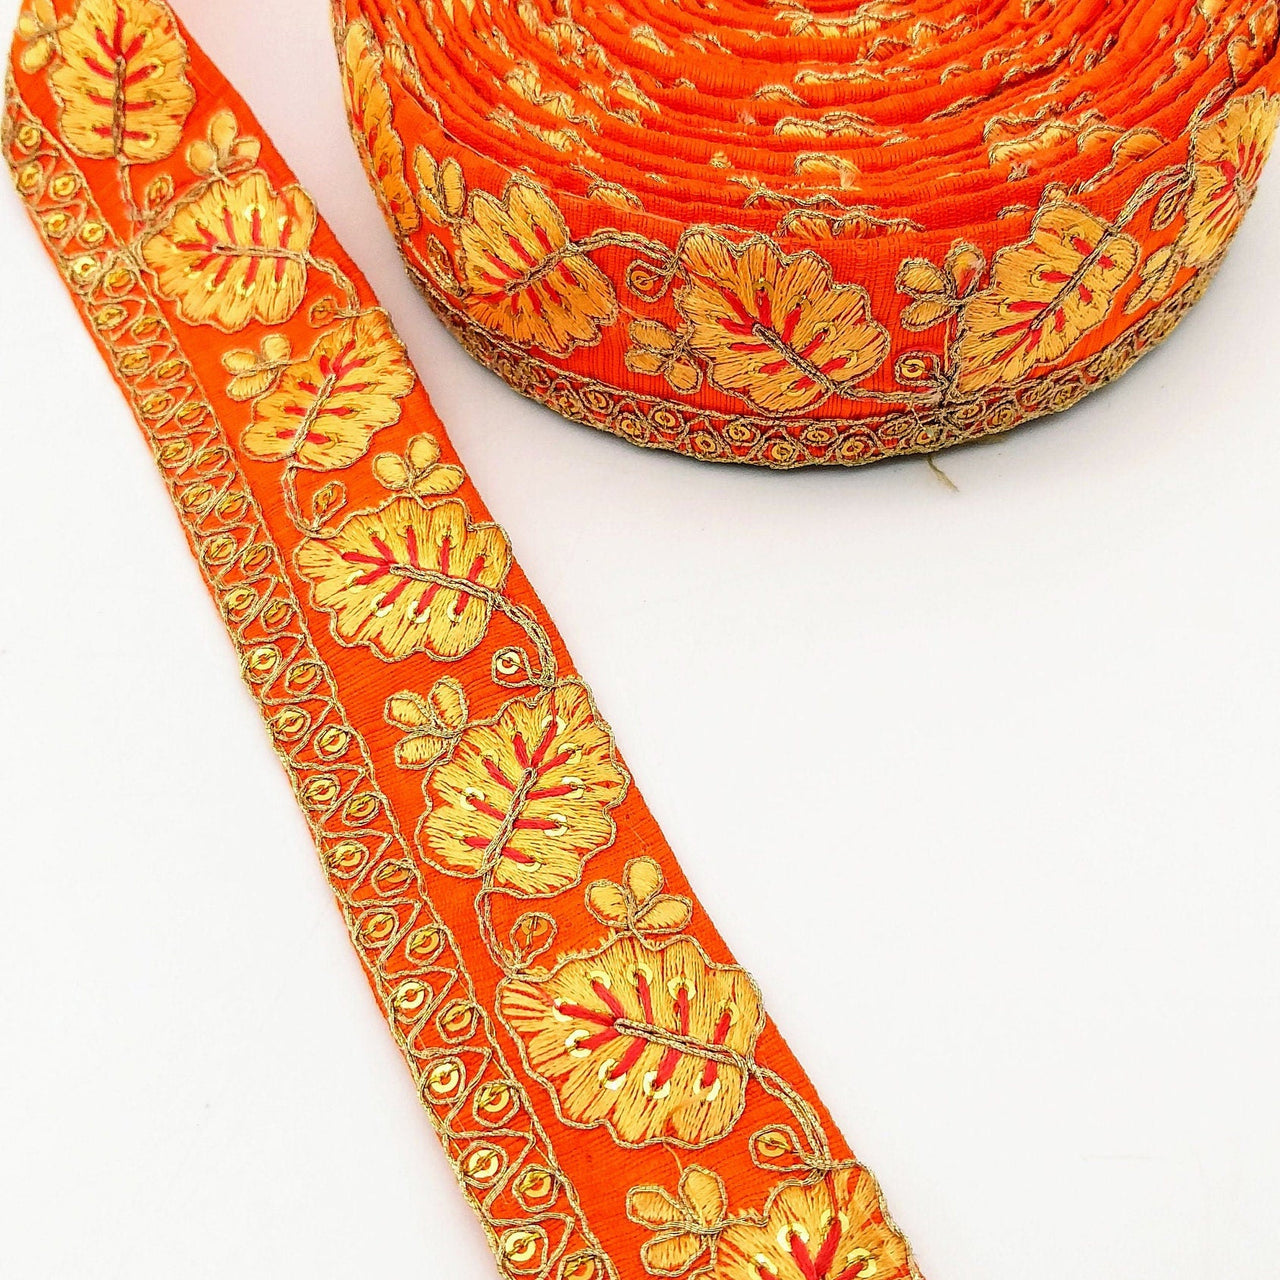 Orange Trim with Floral Embroidery Beige Embroidered Leaves Trim, Decorative Trim, Indian Border